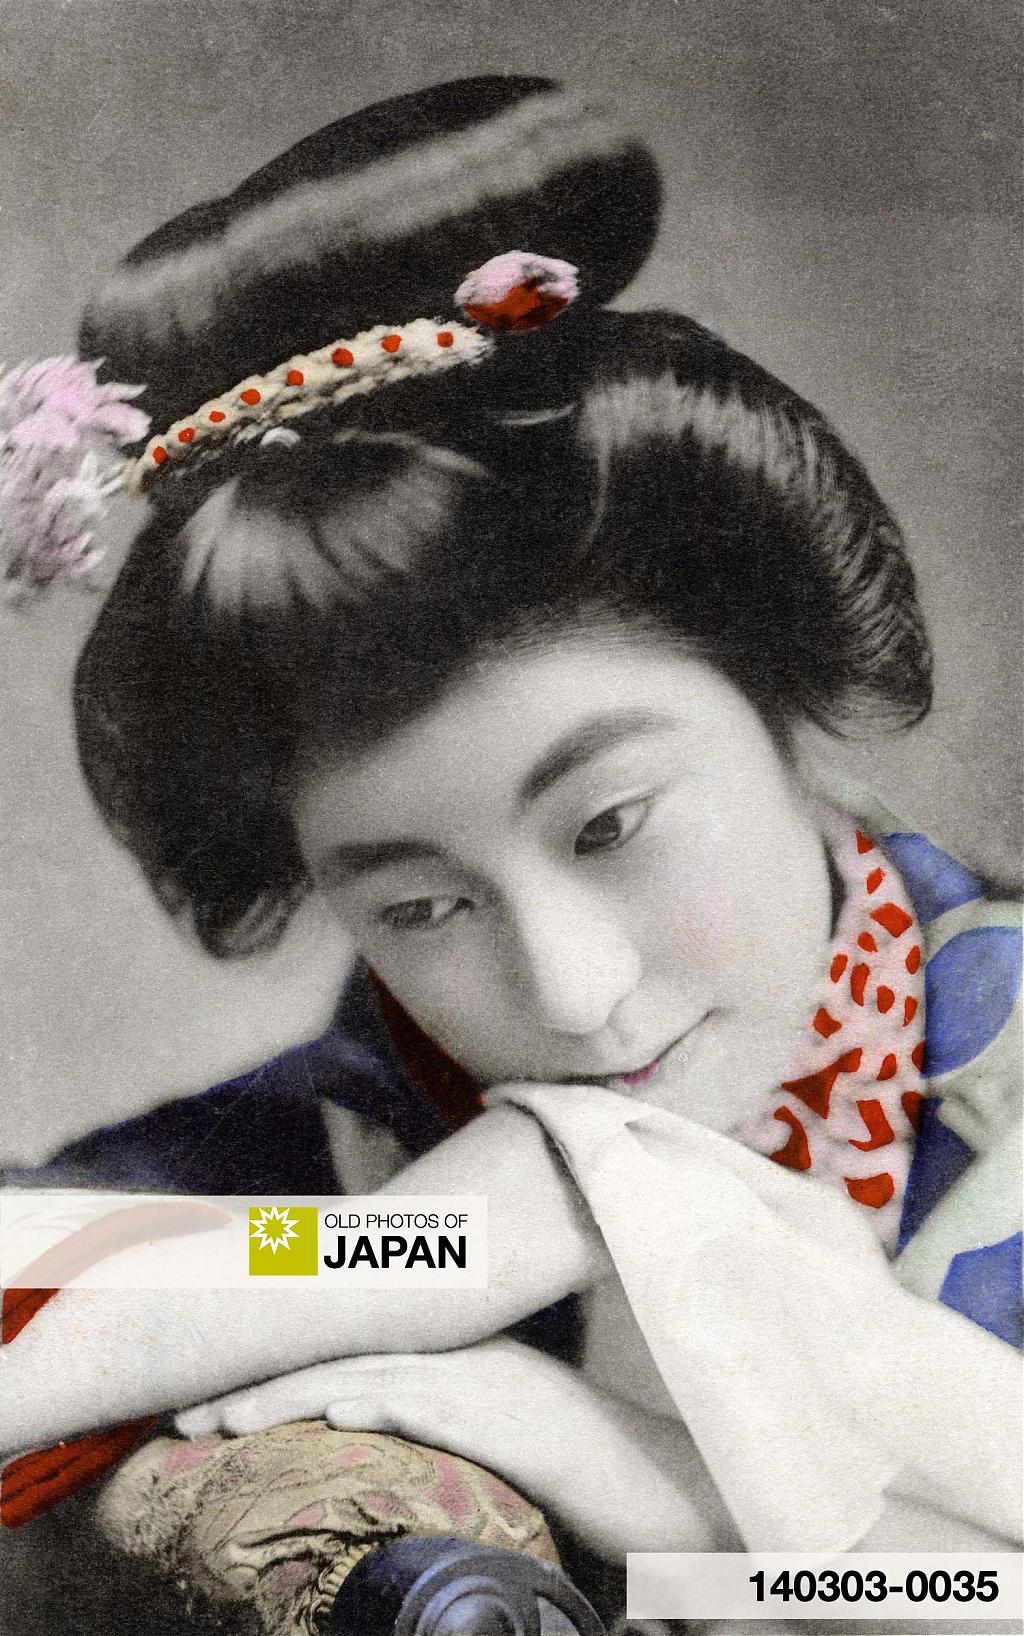 140303-0035 - Japanese Woman with Handkerchief, 1910s